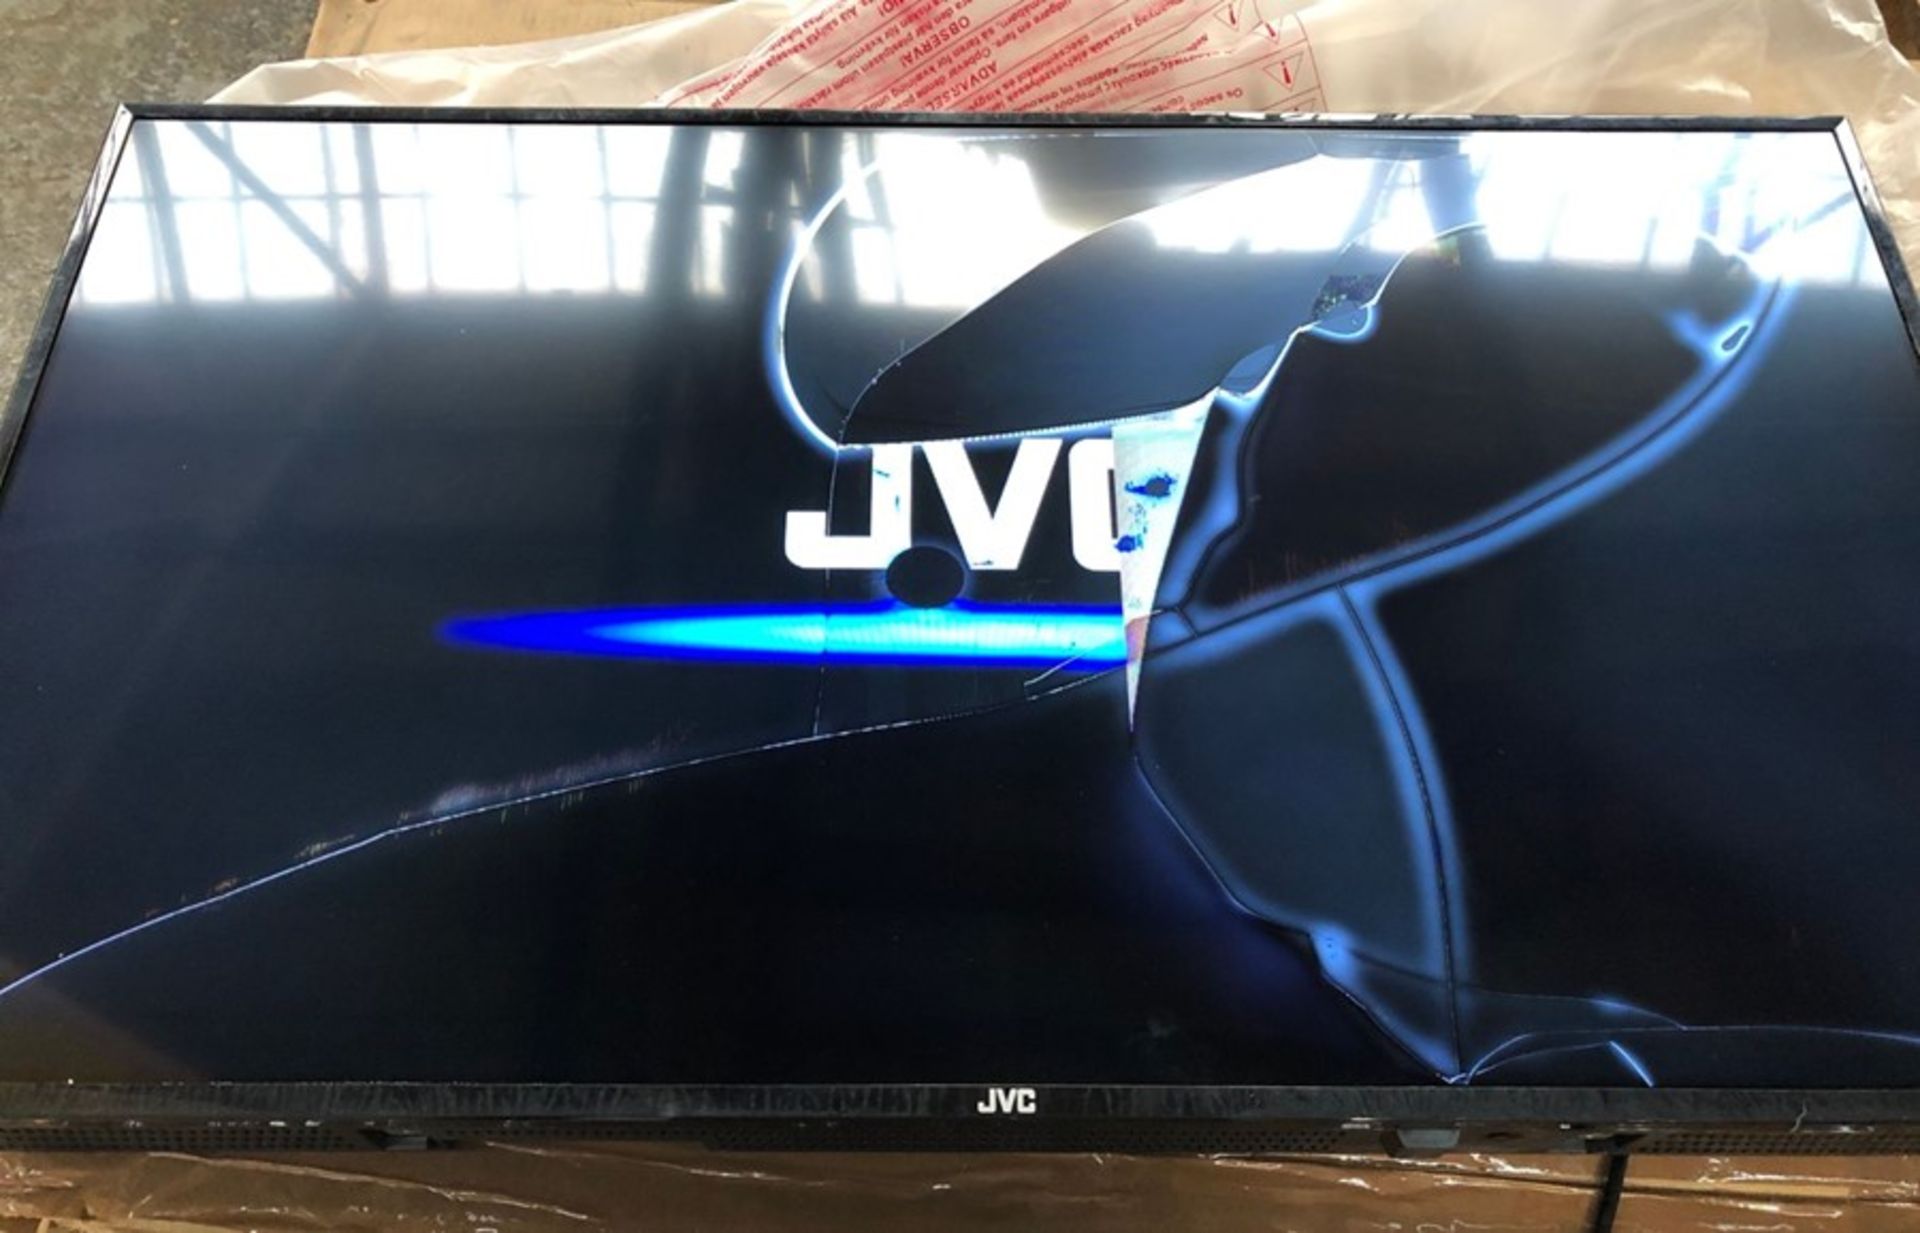 JVC 40" FULL HD LED TV - LT-40C590 / RRP £249.99 / TESTED AND TURNS ON, SCREEN DAMAGED. COMES WITH